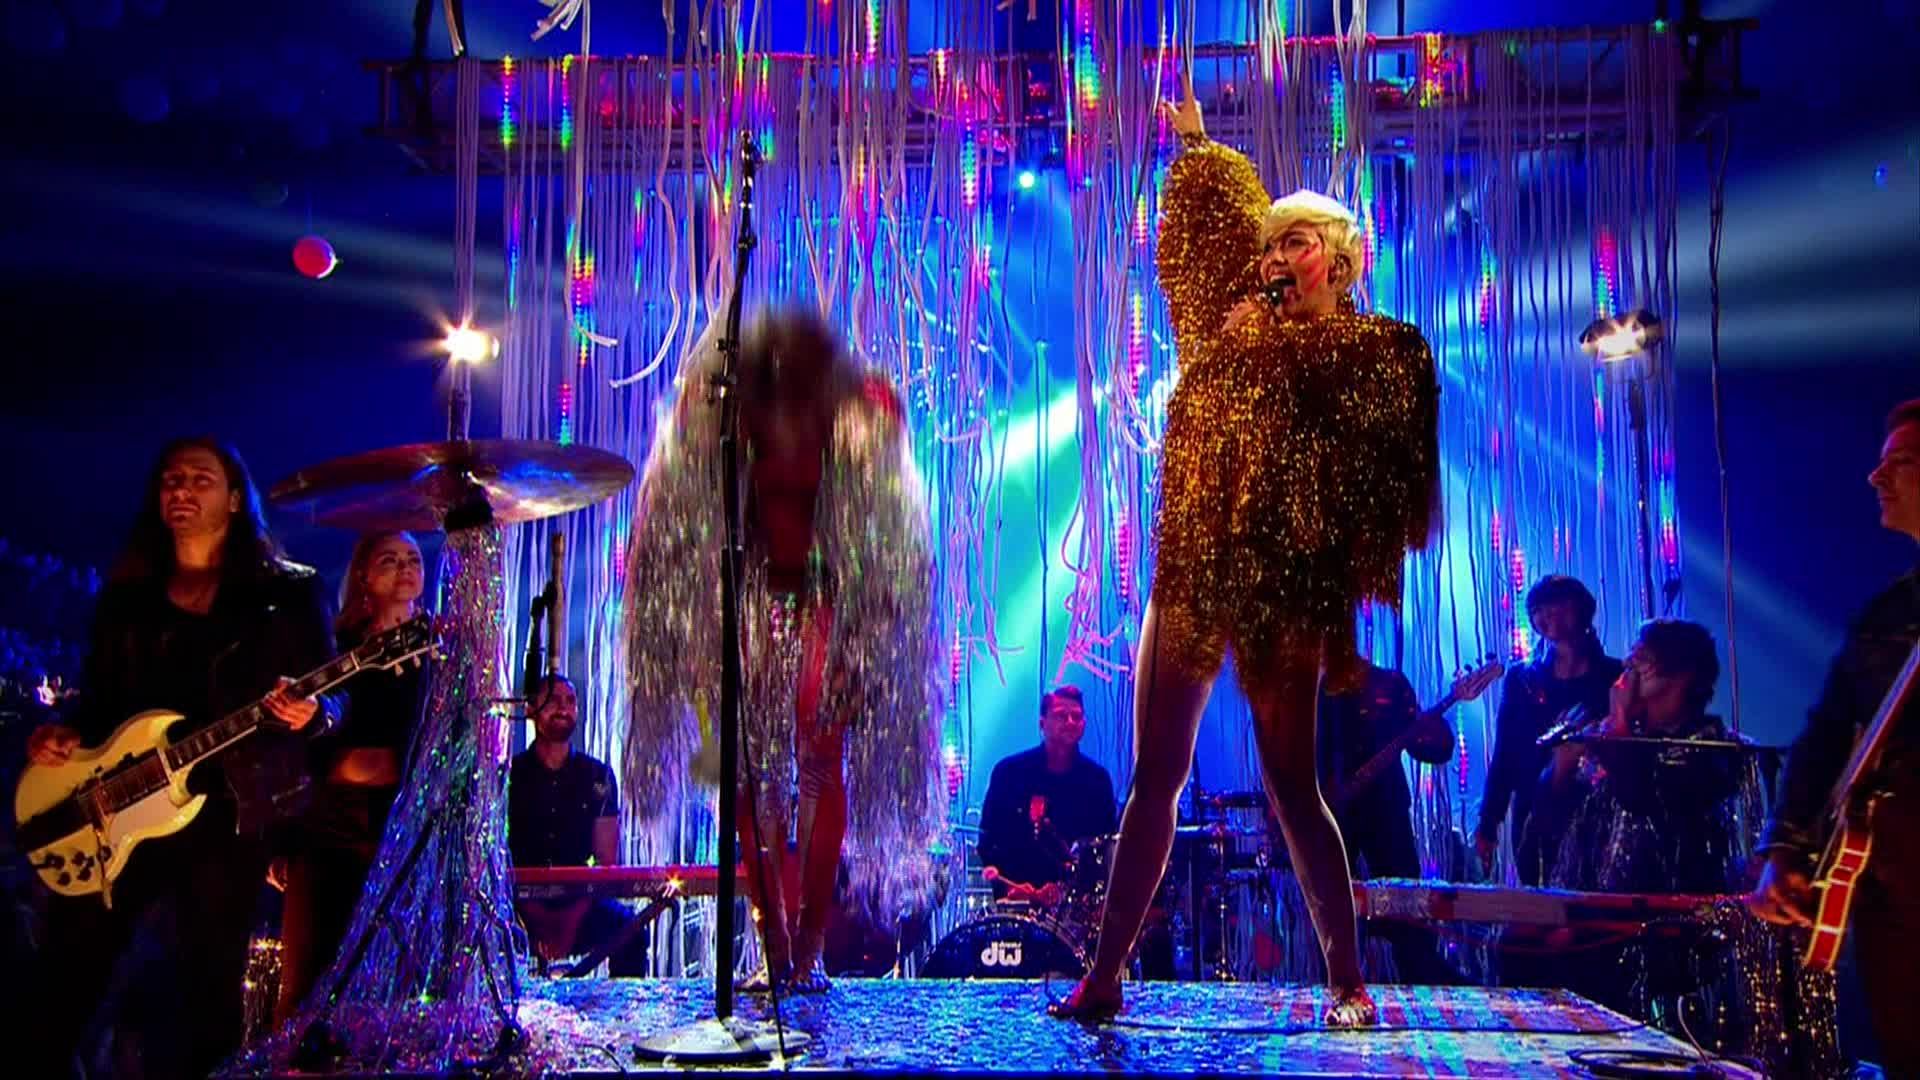 Miley Cyrus [ft The Flaming Lips] - 2014-05-18, Billboard Music Awards - 1080 TS - LSD preview 29